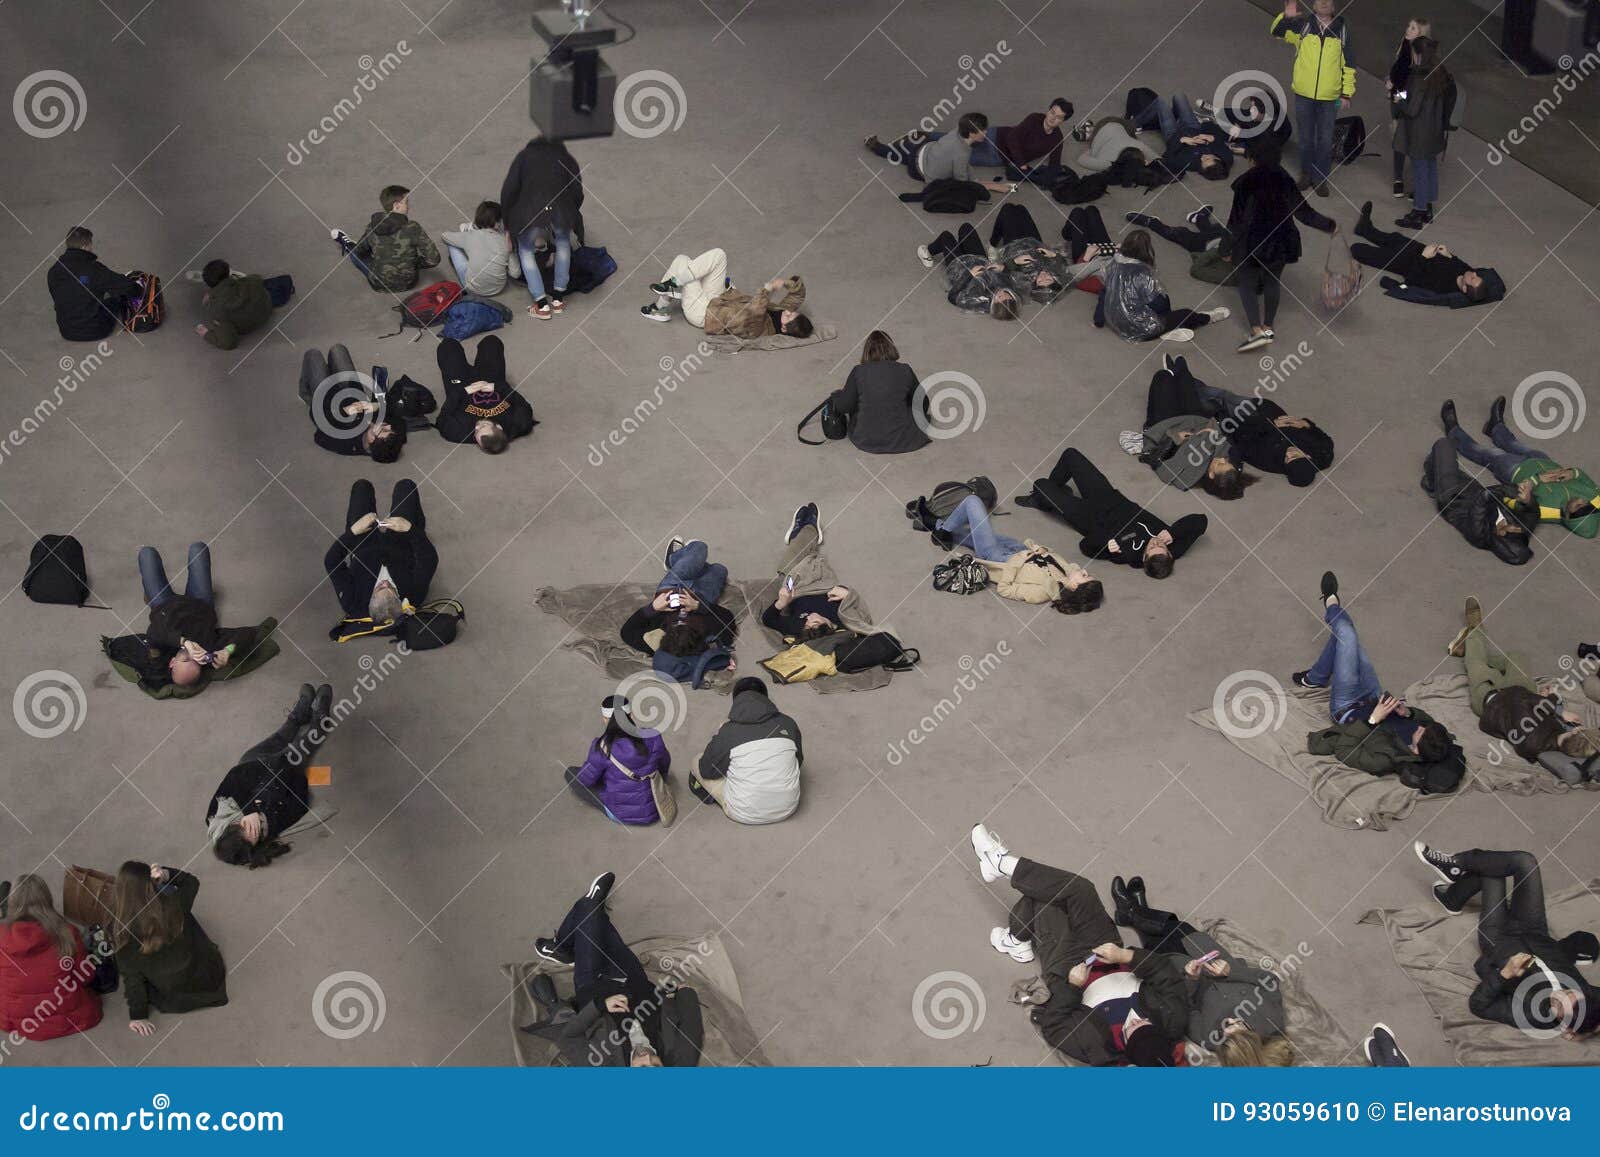 People Lie On The Floor In The Turbine Hall In The Tate Modern In